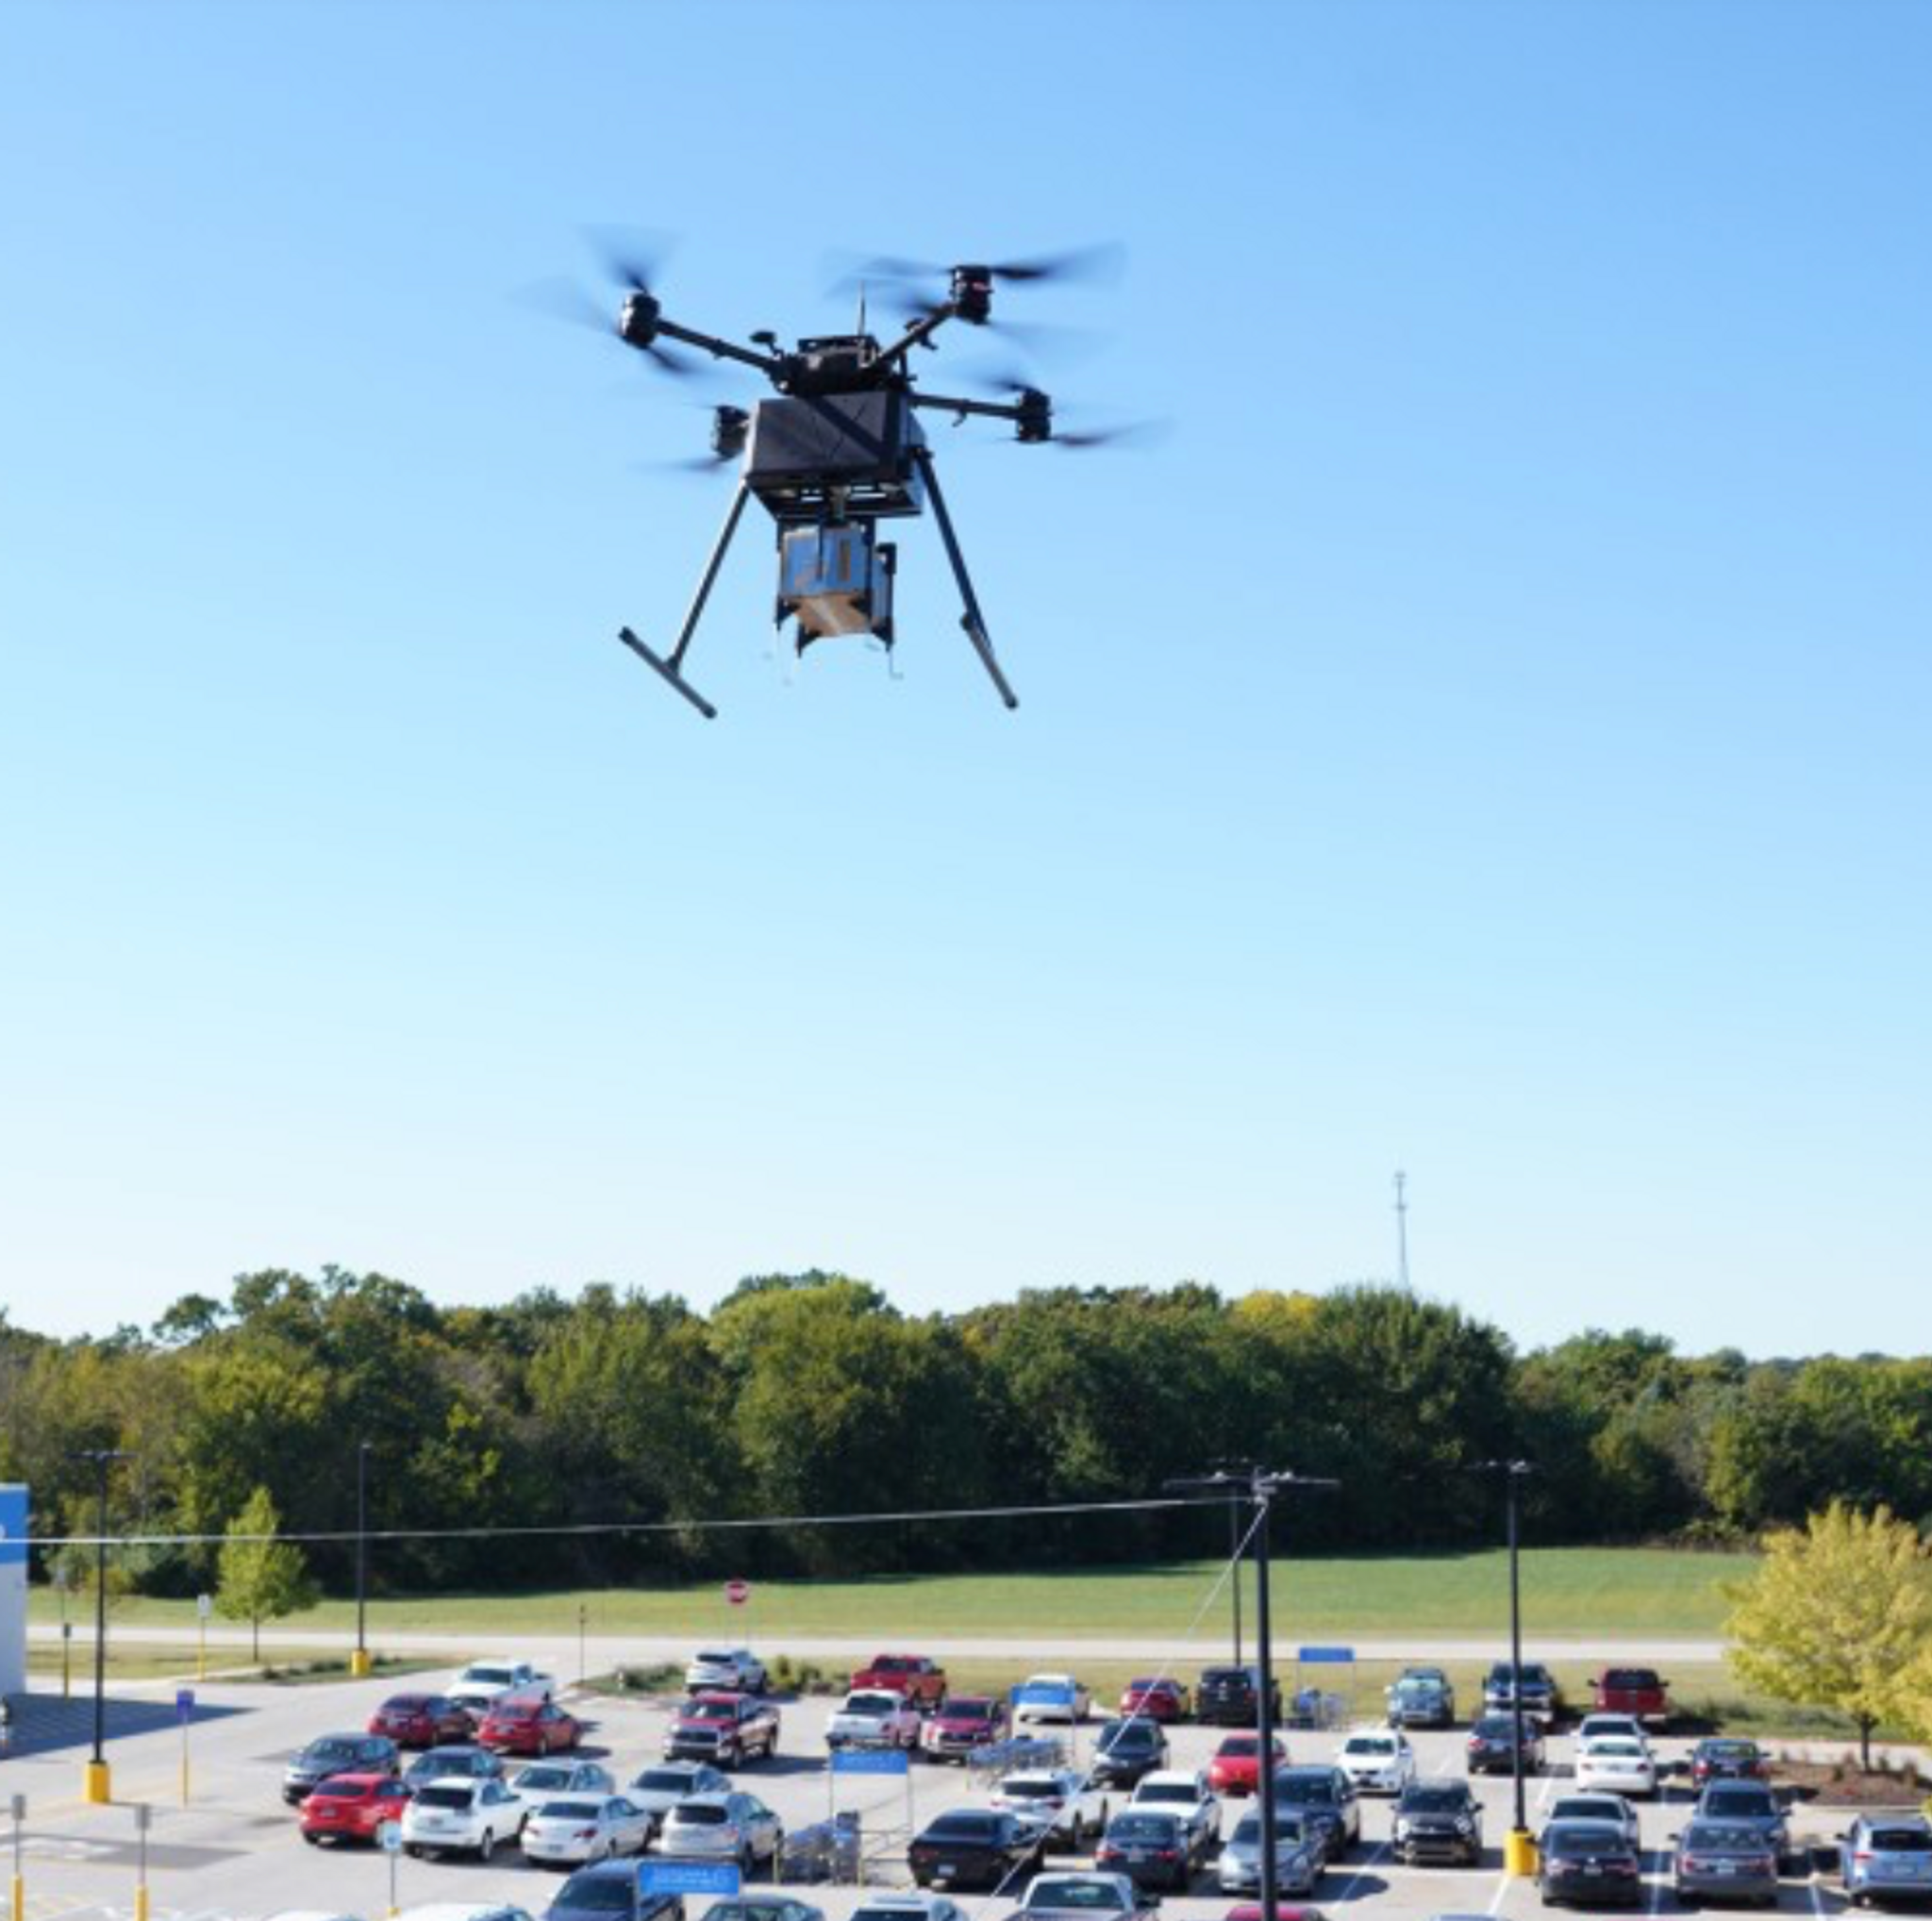 Drone flying through the parking lot